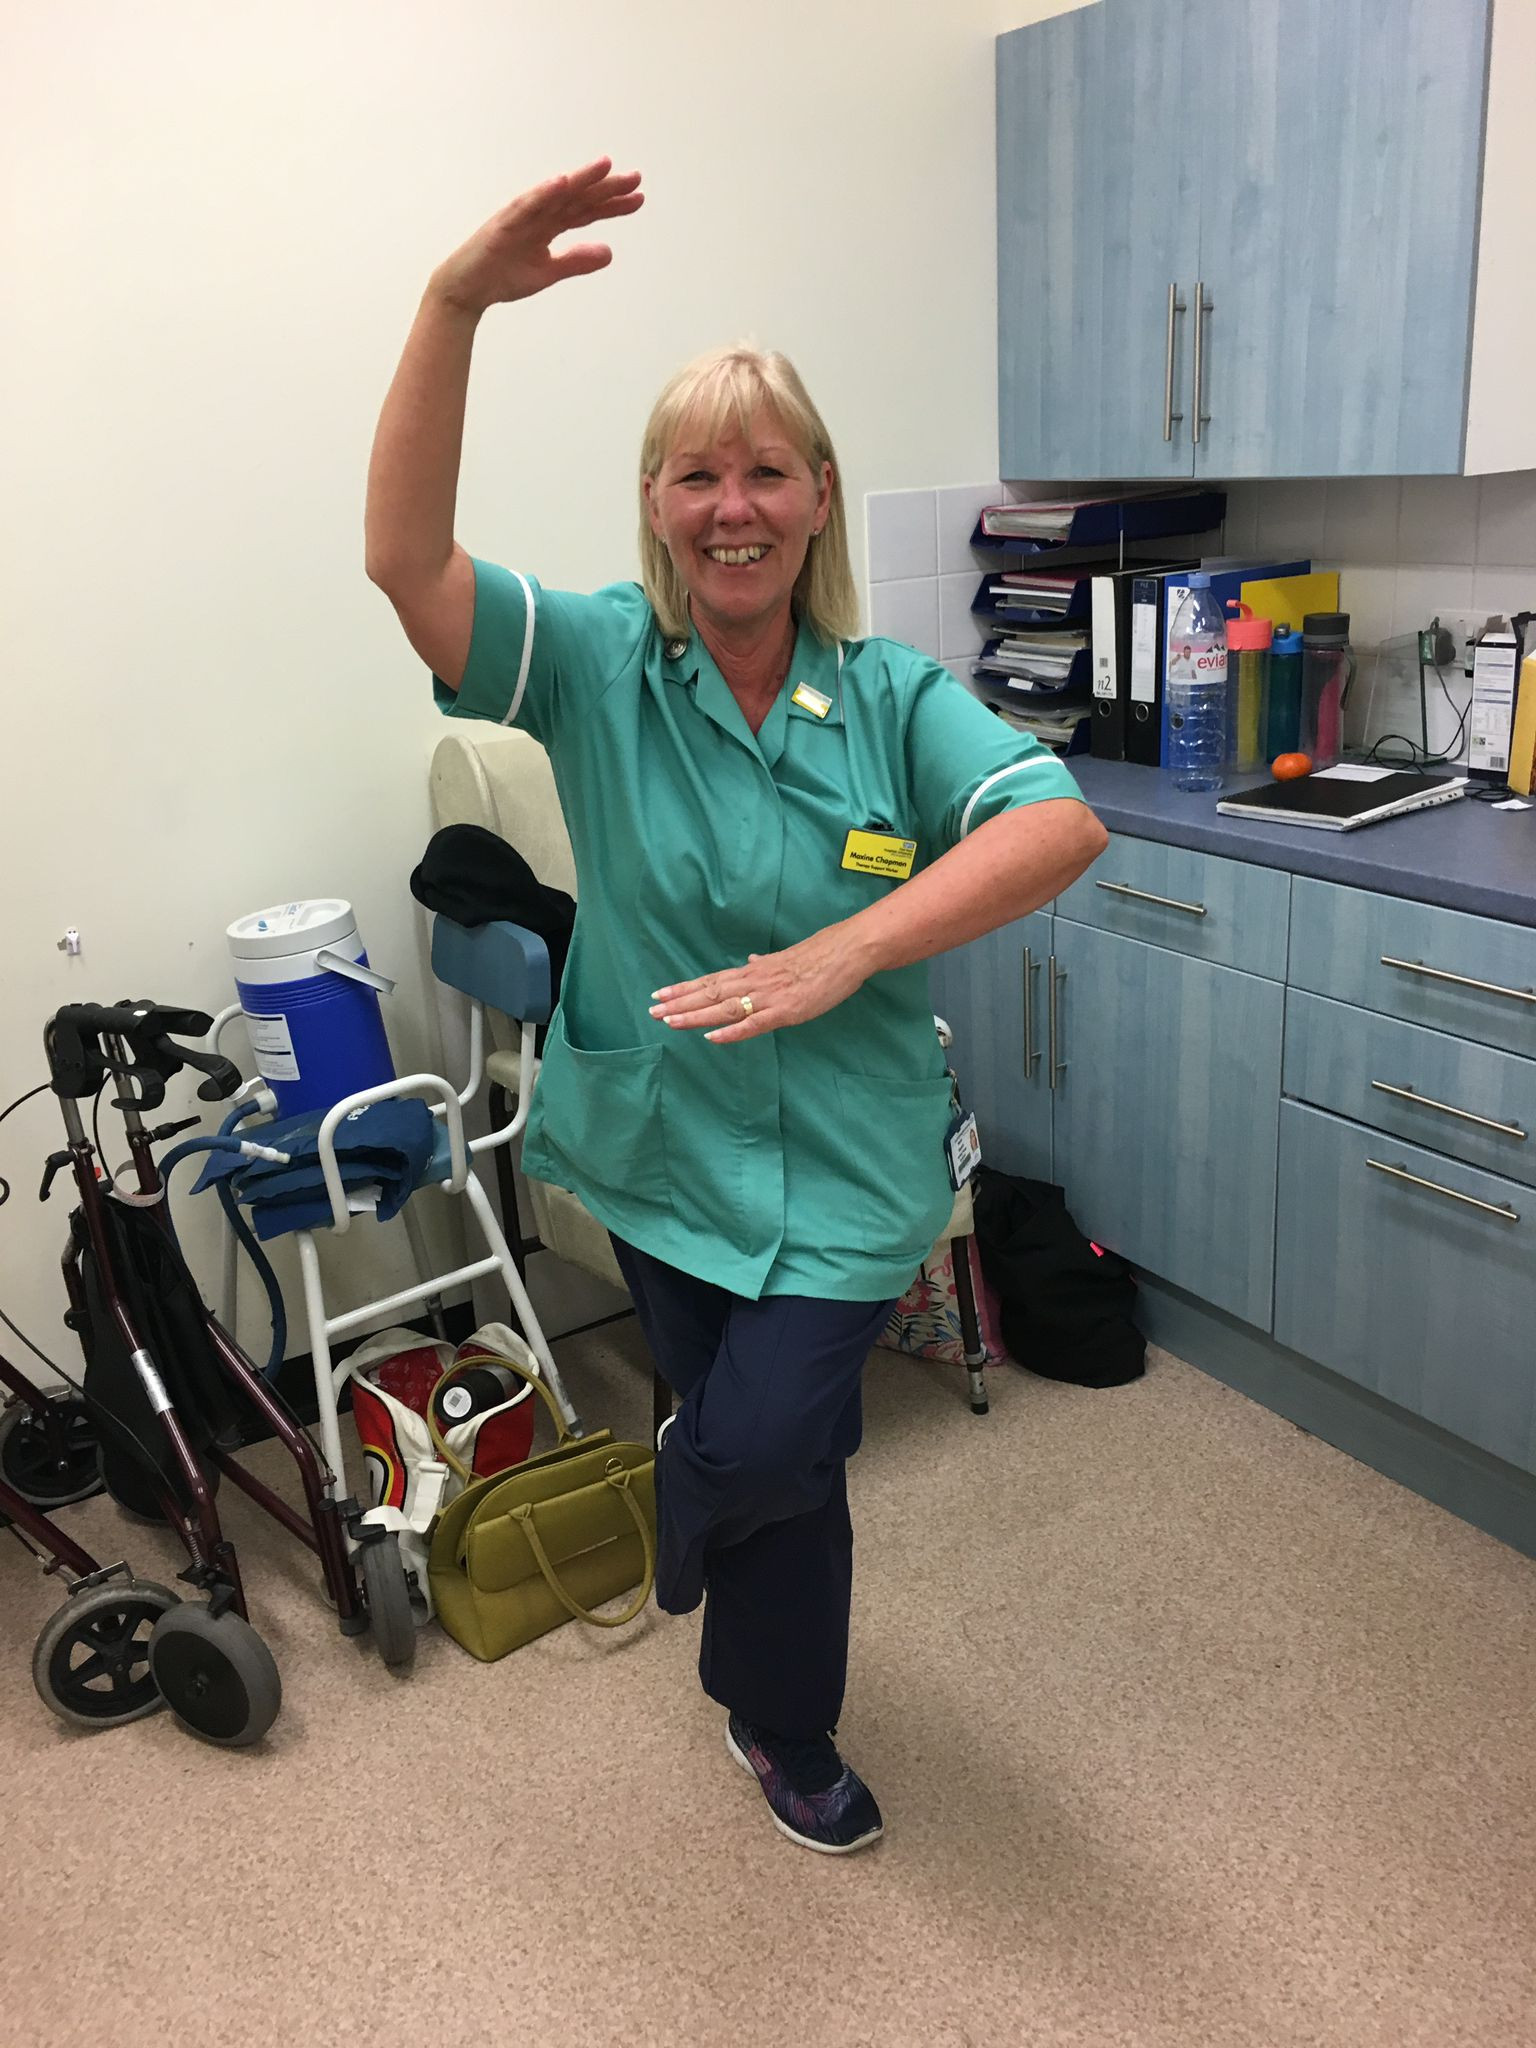 Maxine Chapman, who is retiring after more than 30 years. She is pictured in a staffroom striking a balletic pose with medical equipment behind her